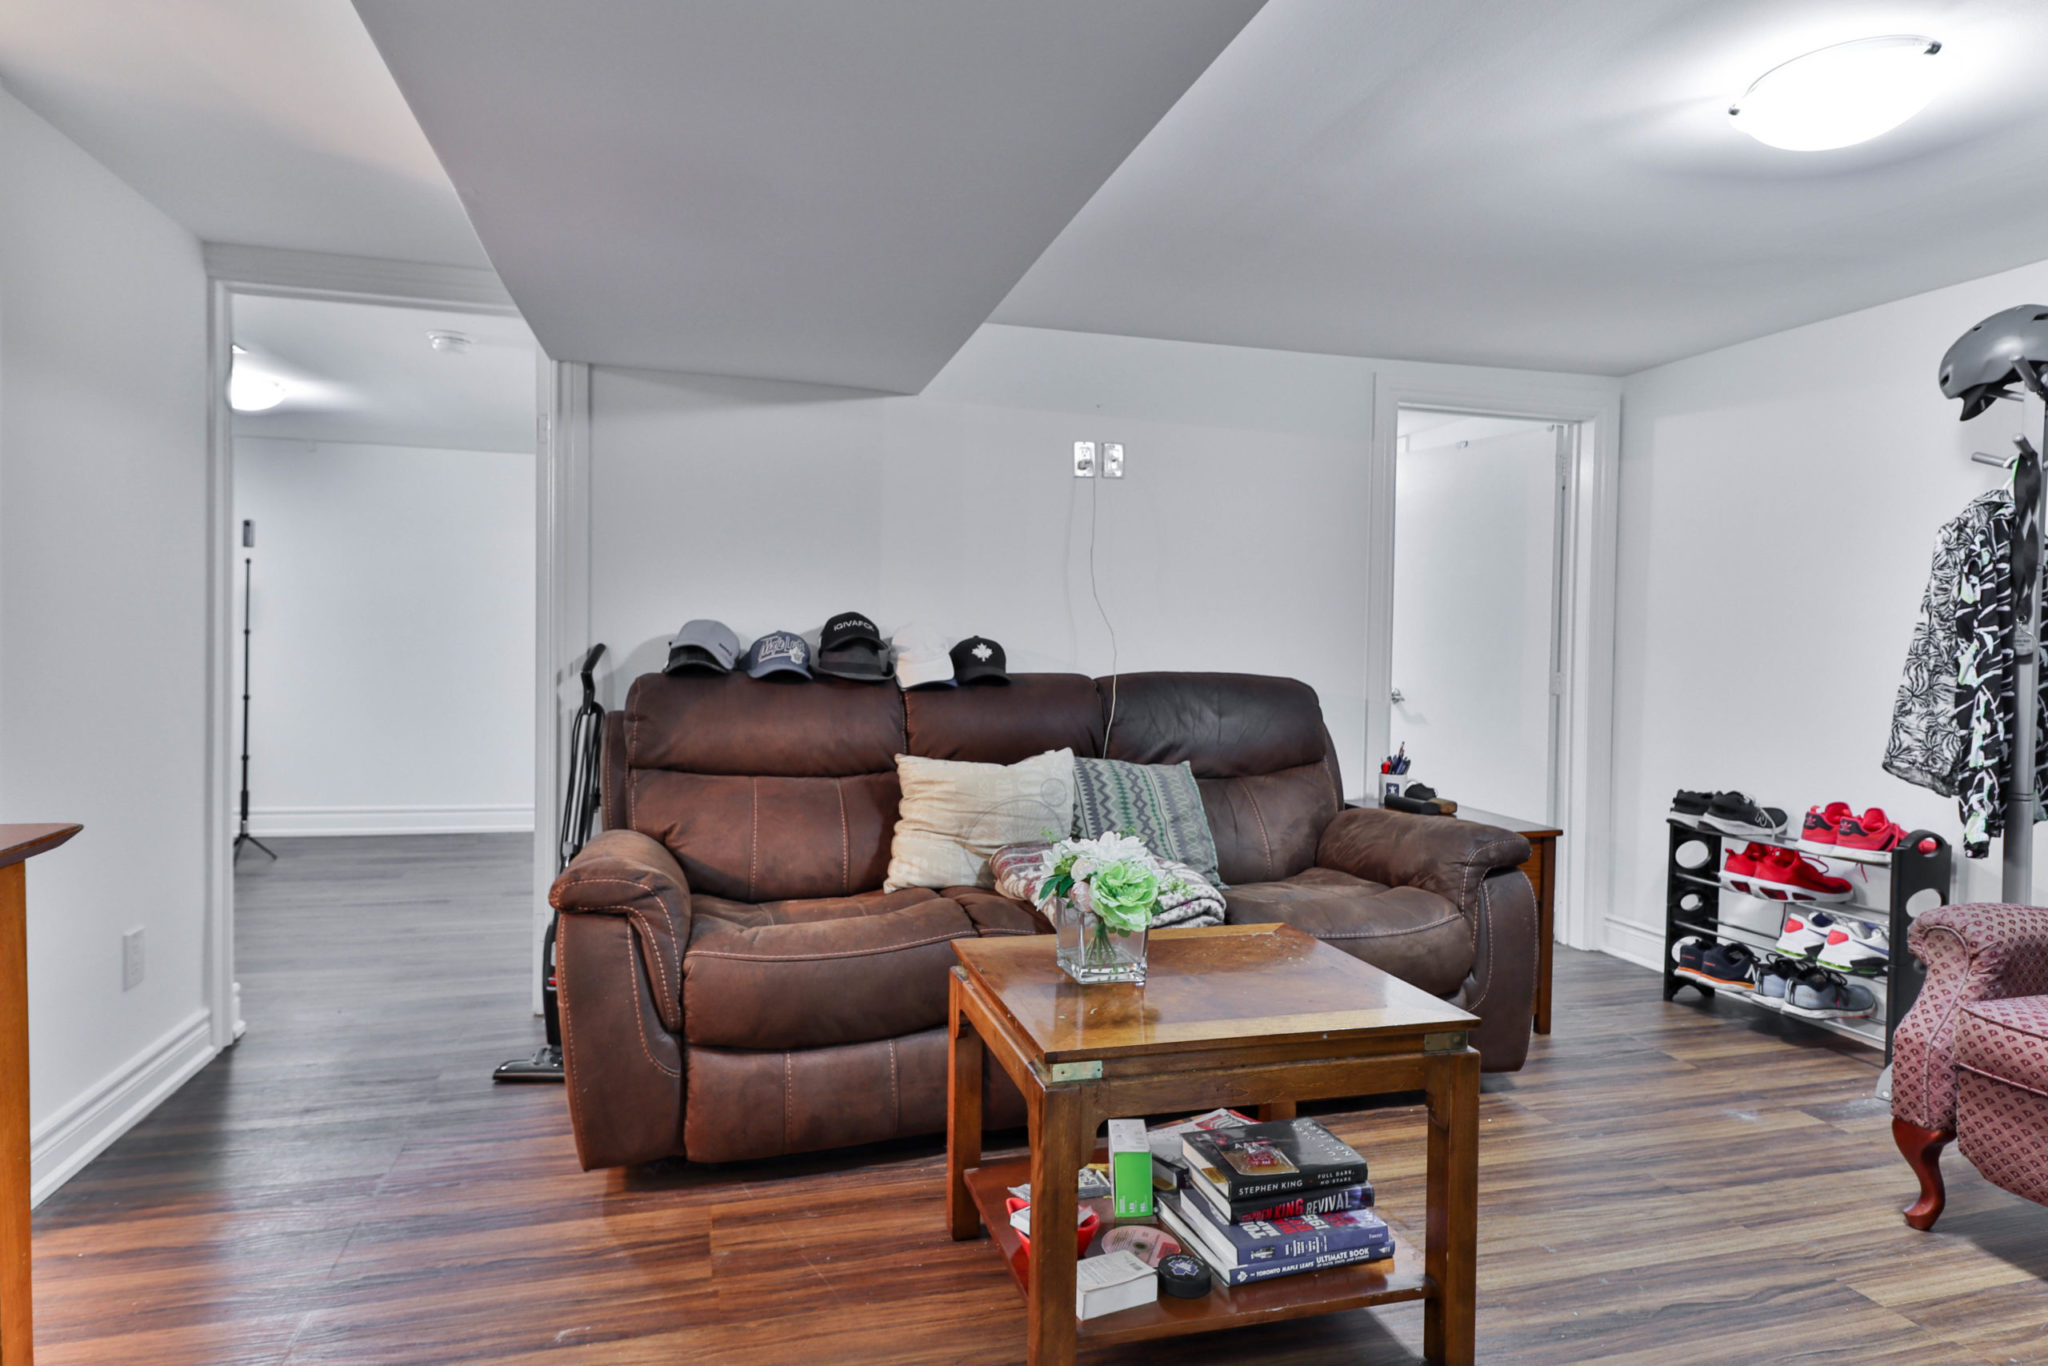 117 Phillip Ave finished basement with laminate floors, gray walls and ceiling lamps.